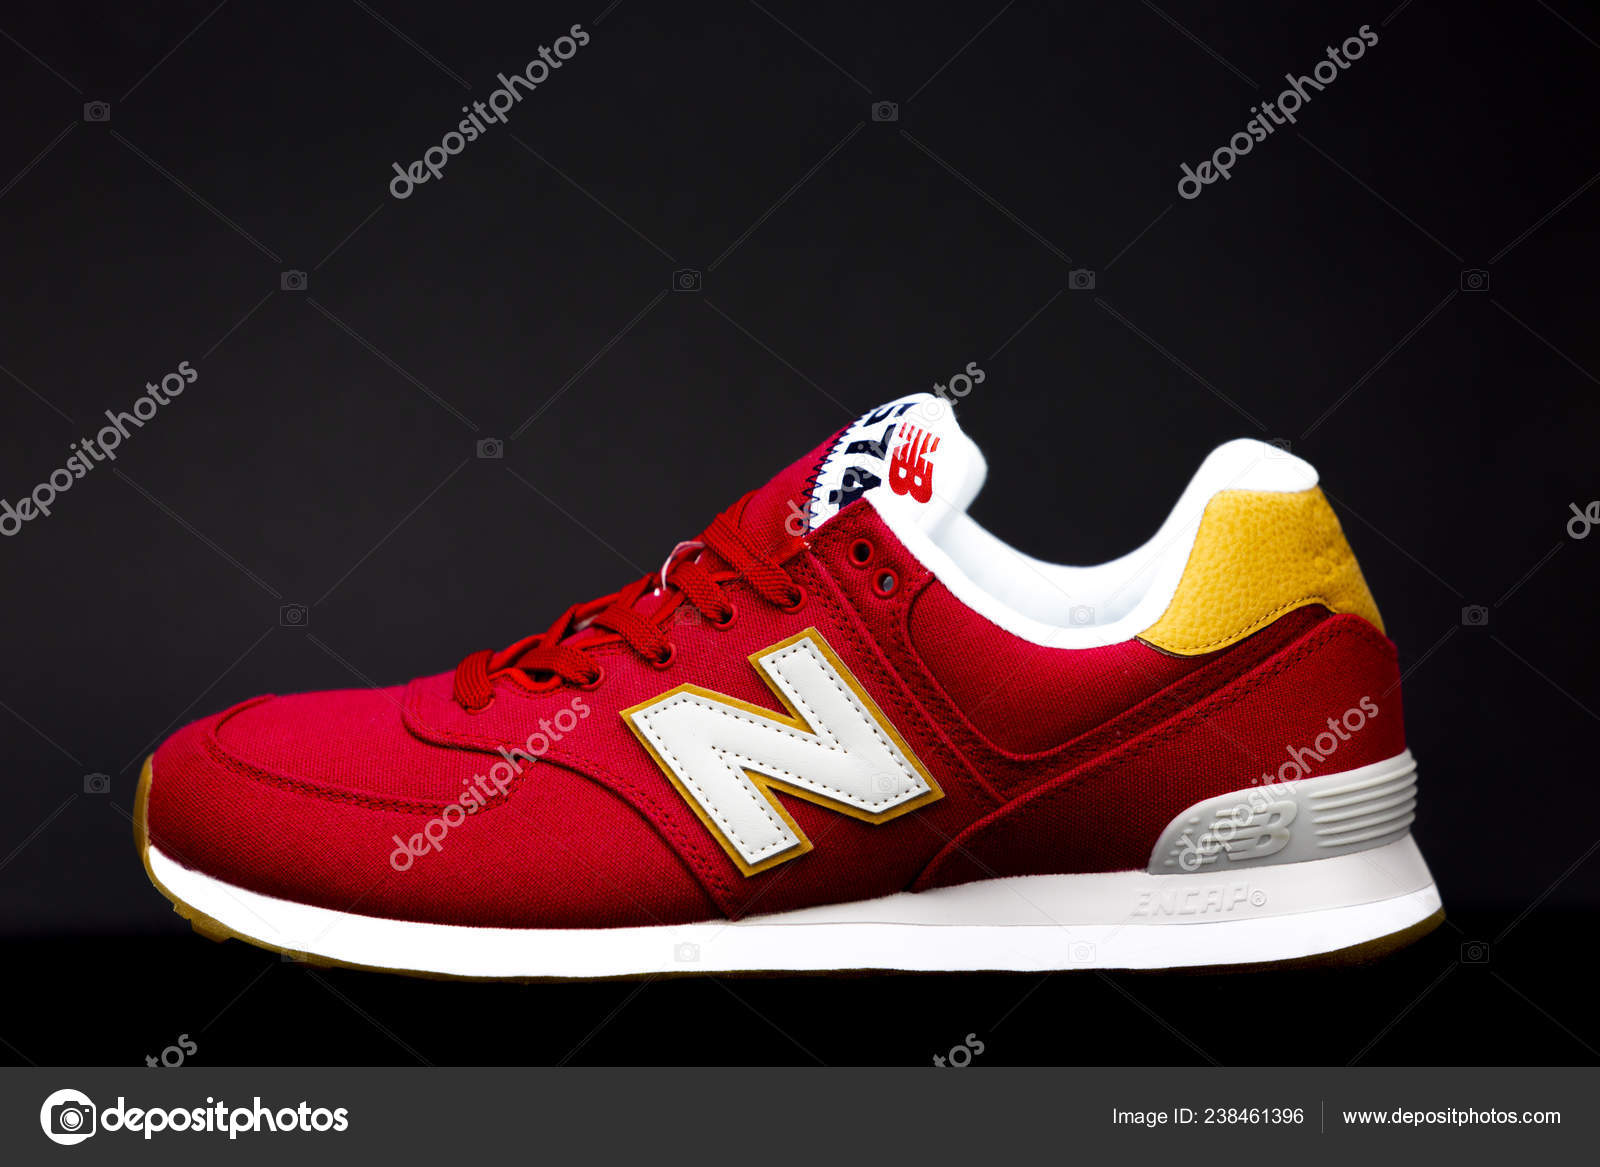 nb athletic shoes